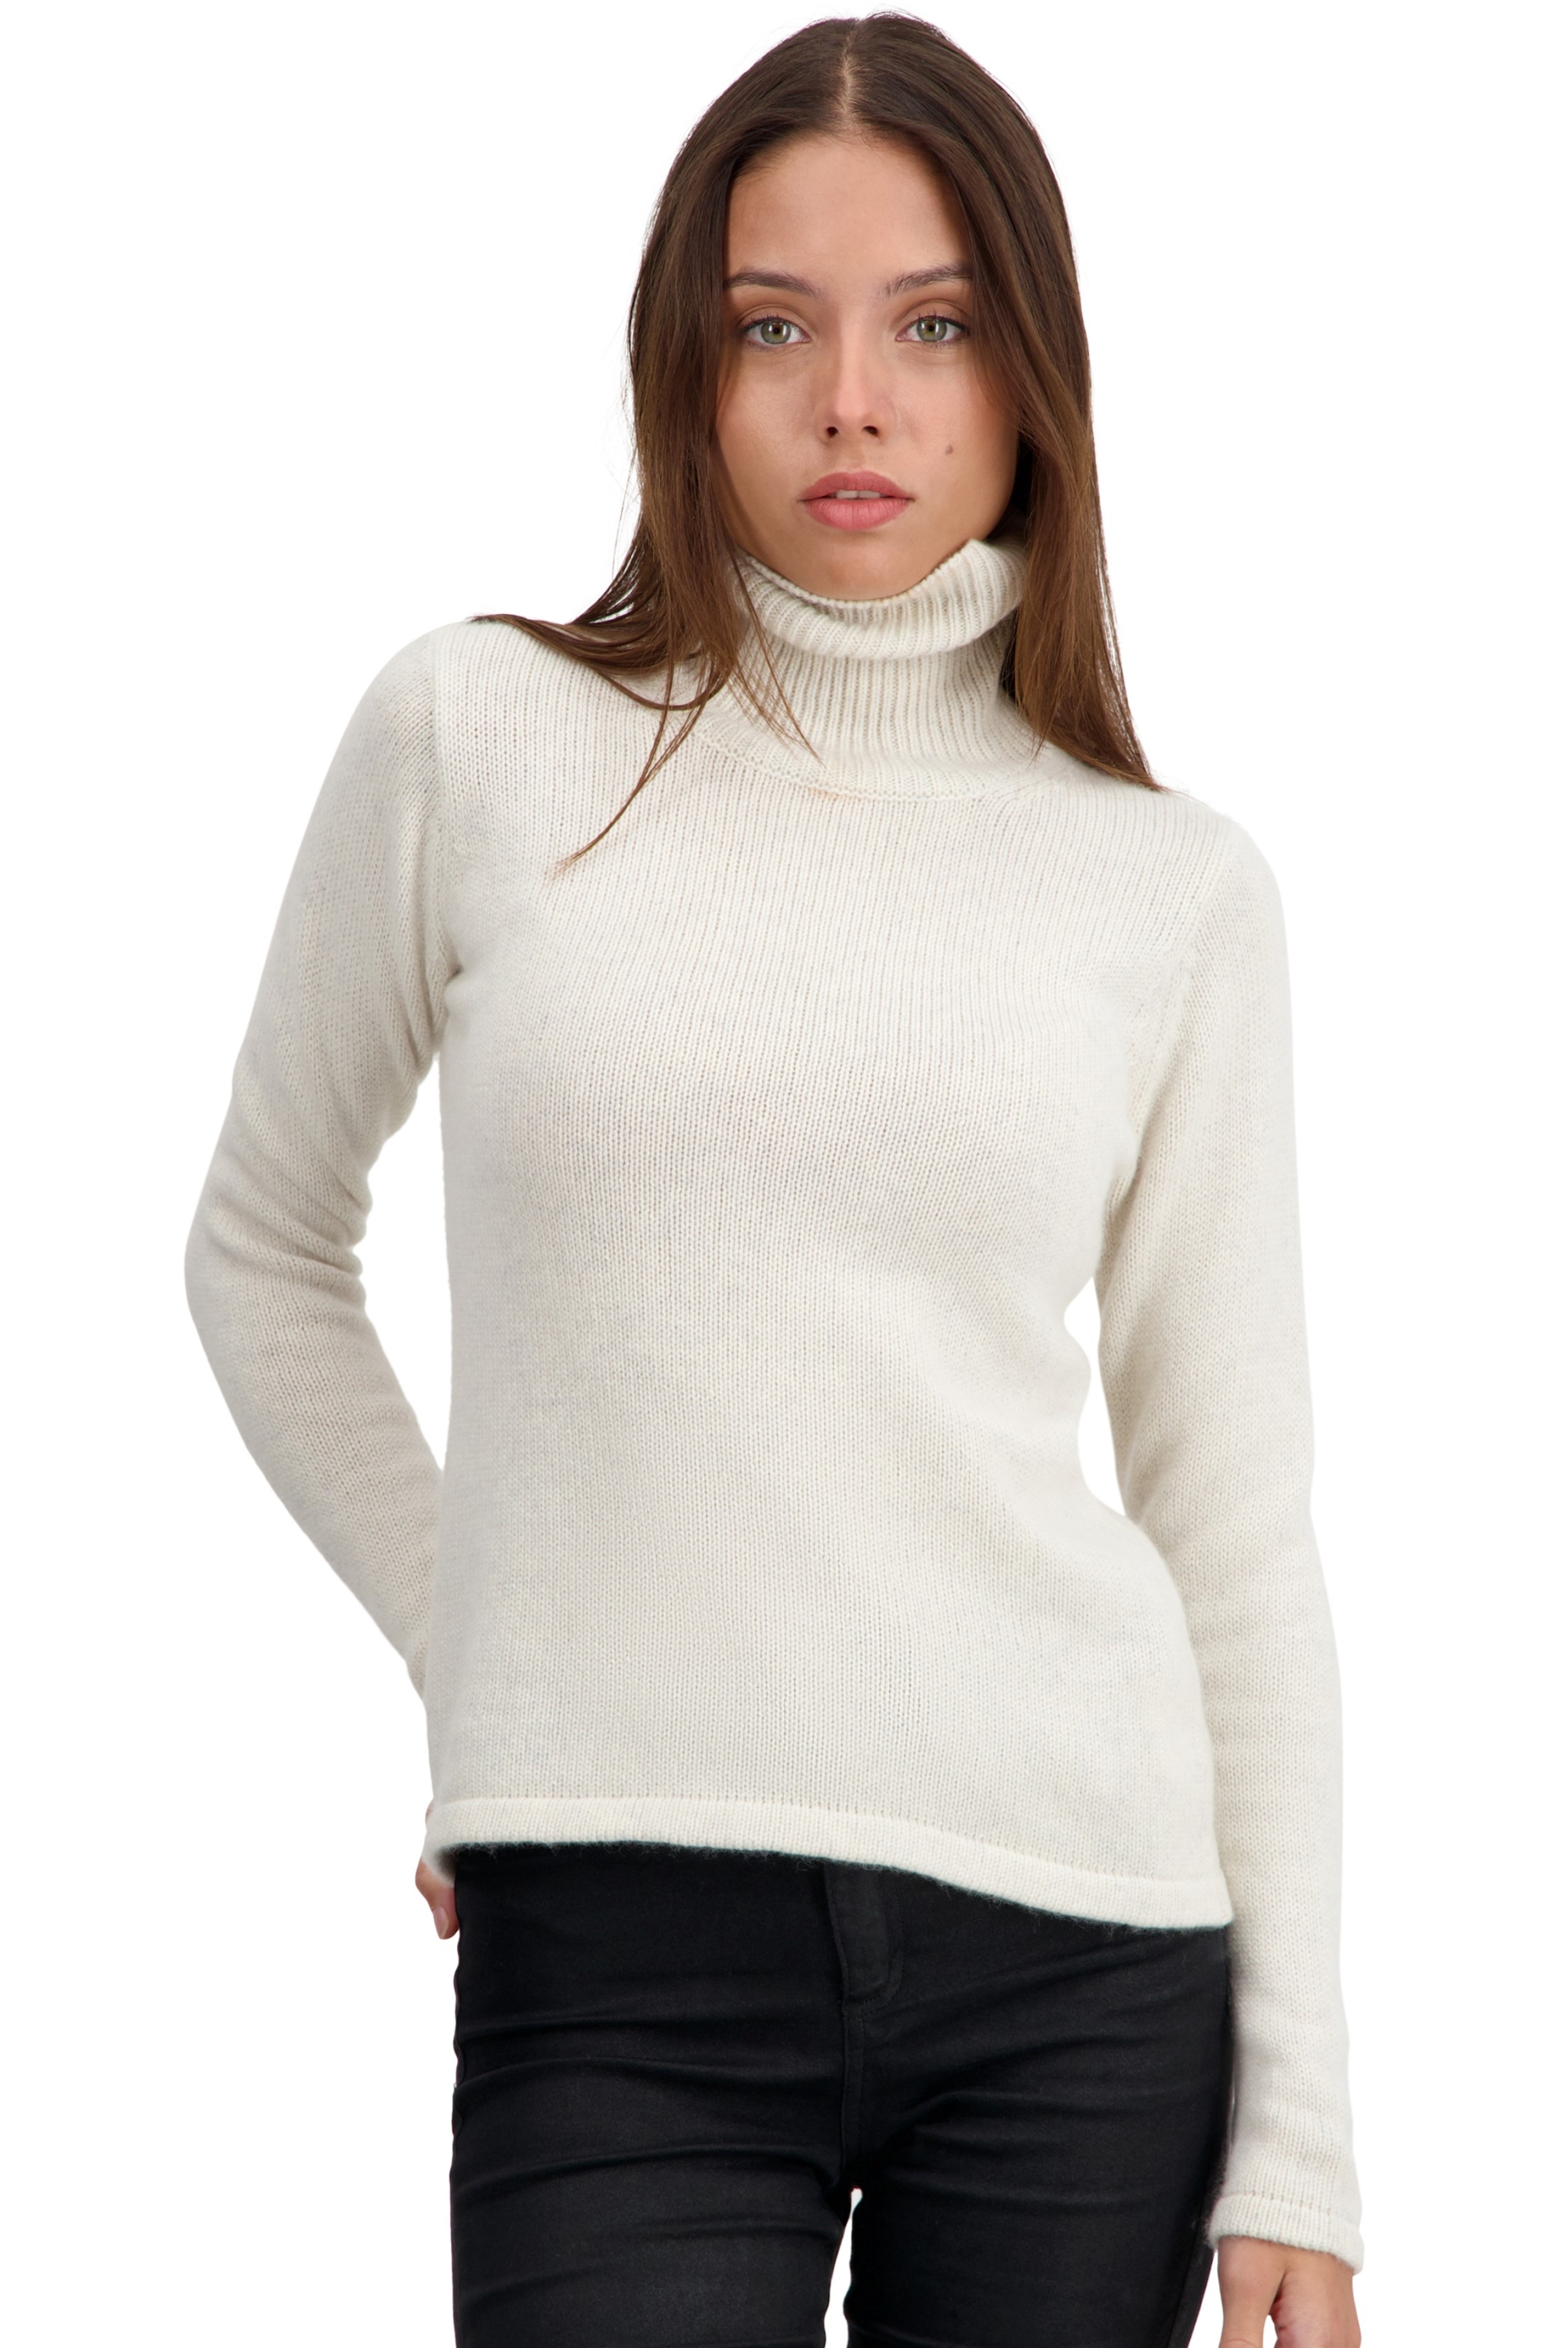 Cashmere ladies basic sweaters at low prices taipei first phantom s